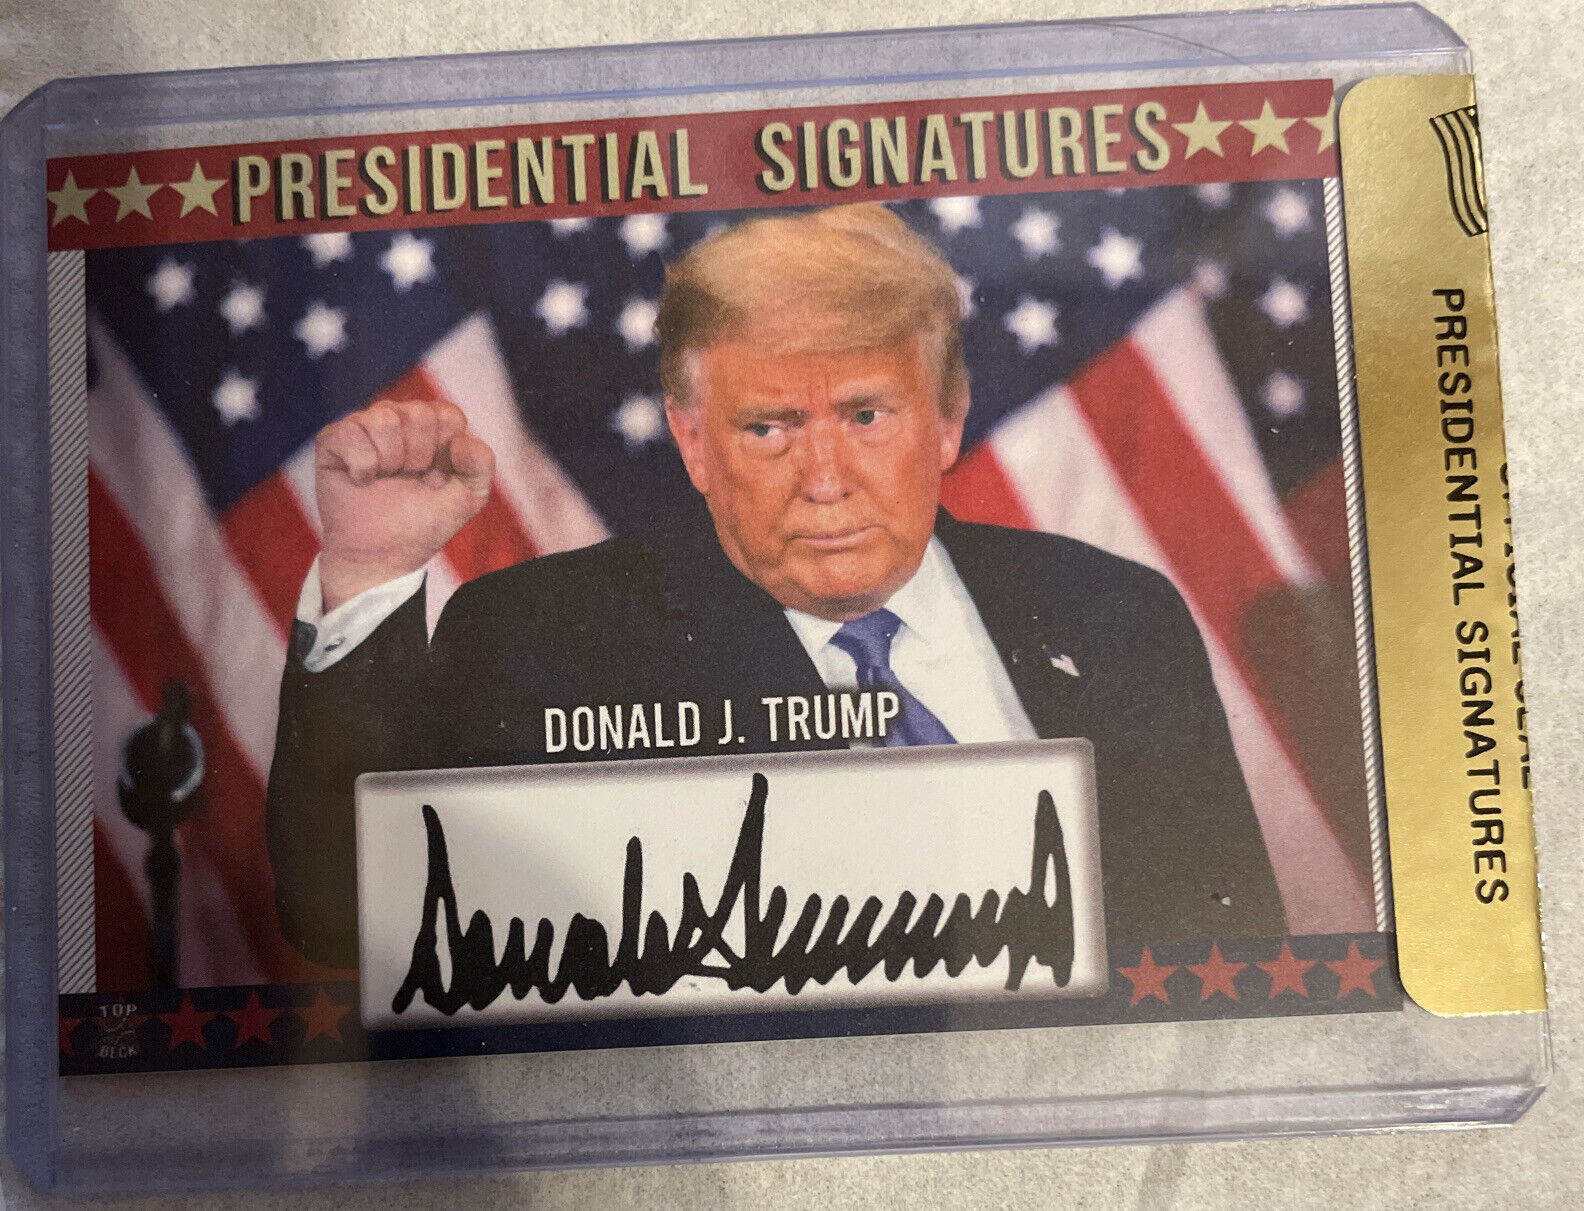 Donald Trump Presidential Signatures Card POTUS 45th President Limited Edition